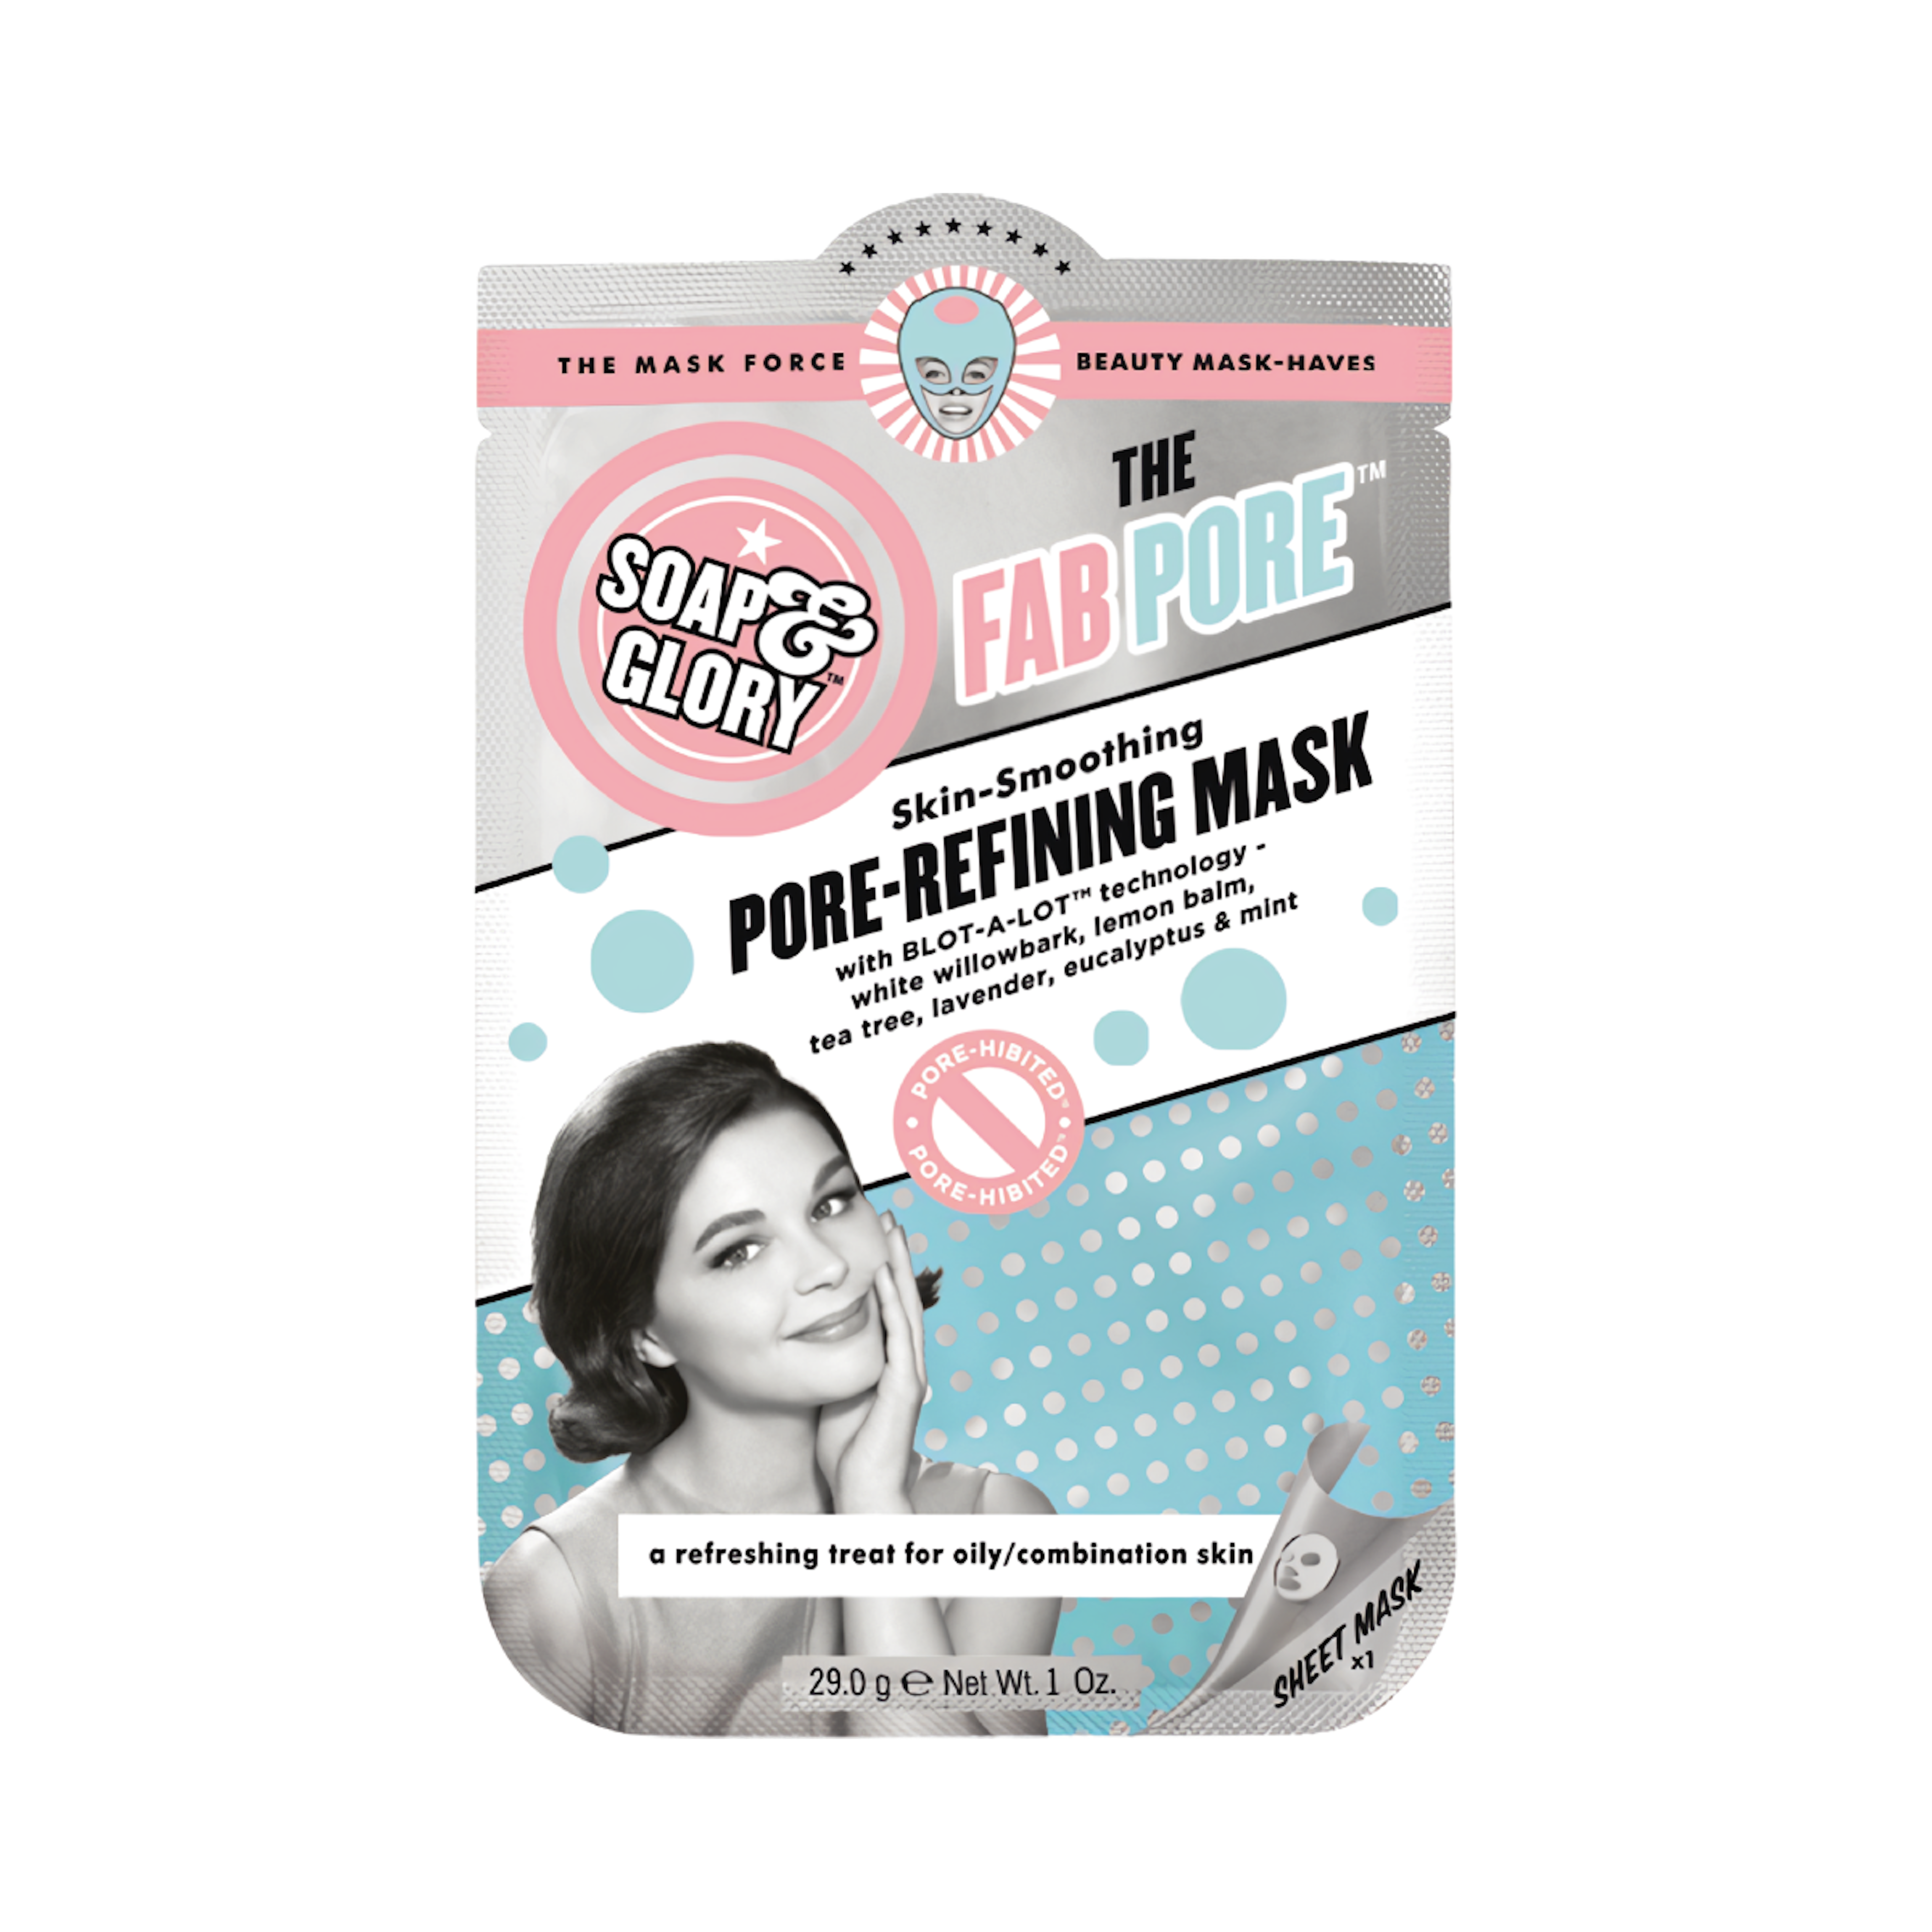 The Fab Pore Refining Mask